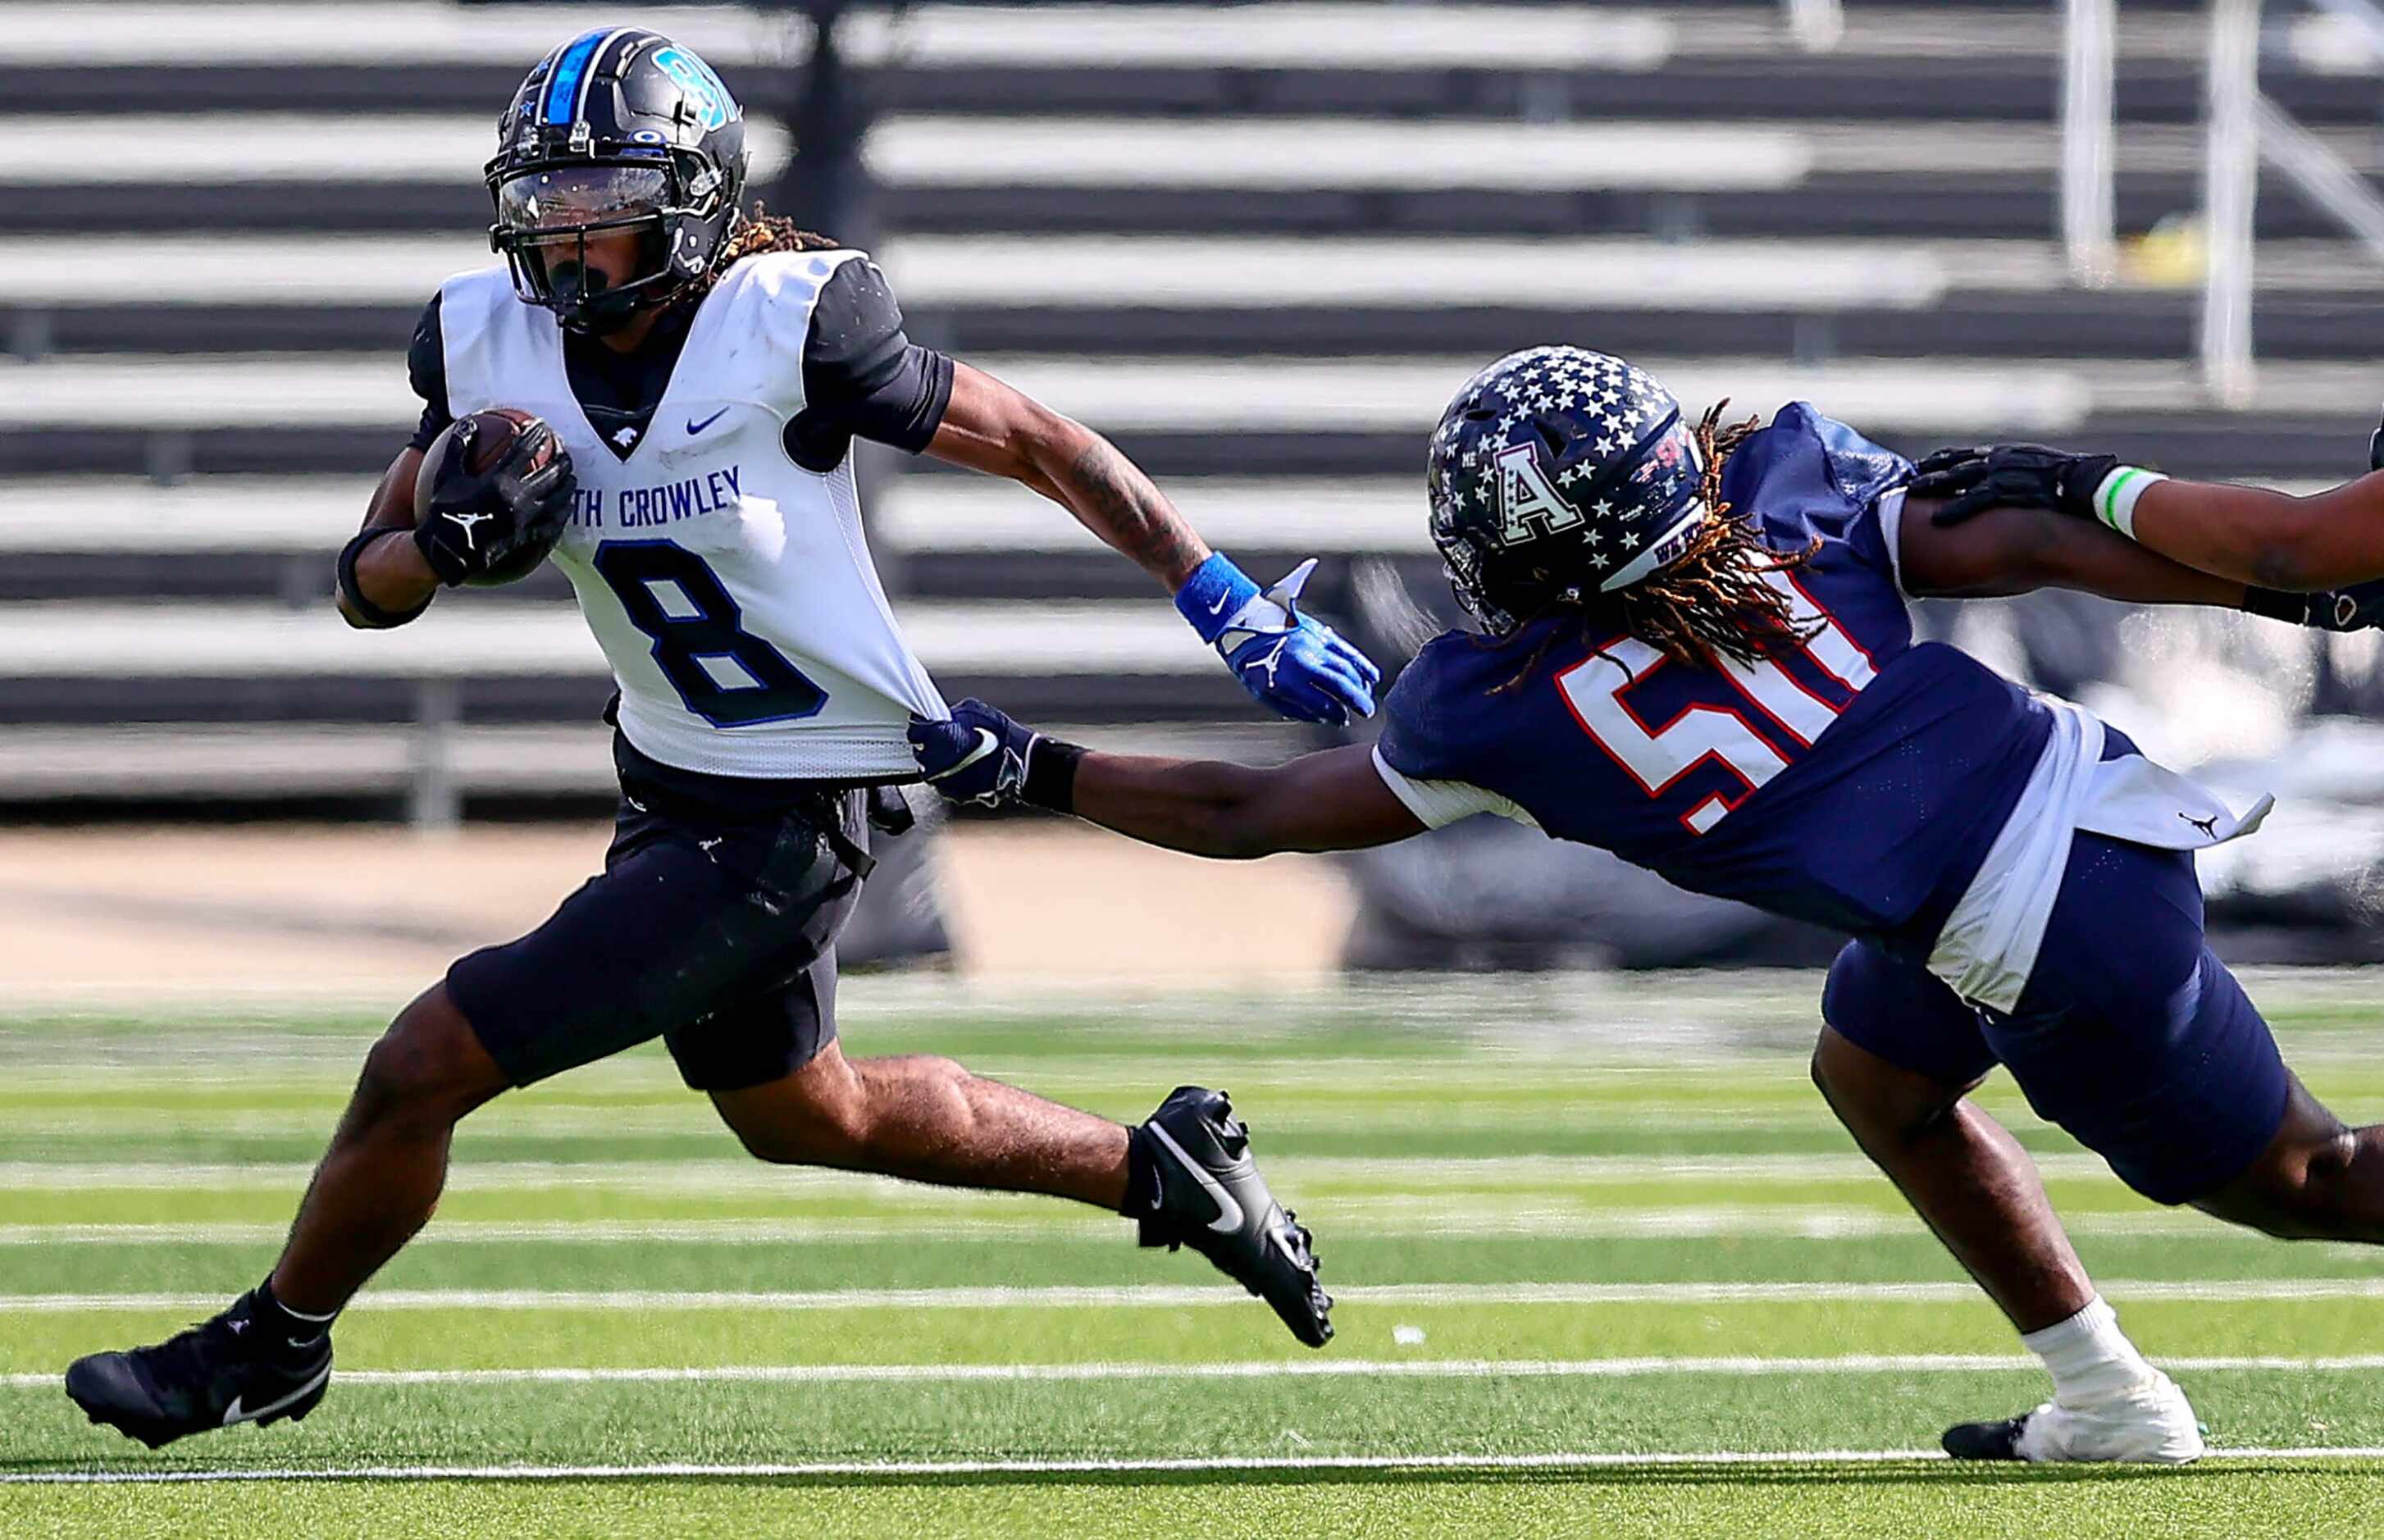 North Crowley running back Ashton Searl (8) tries to get past Allen linebacker Japrei Wafter...